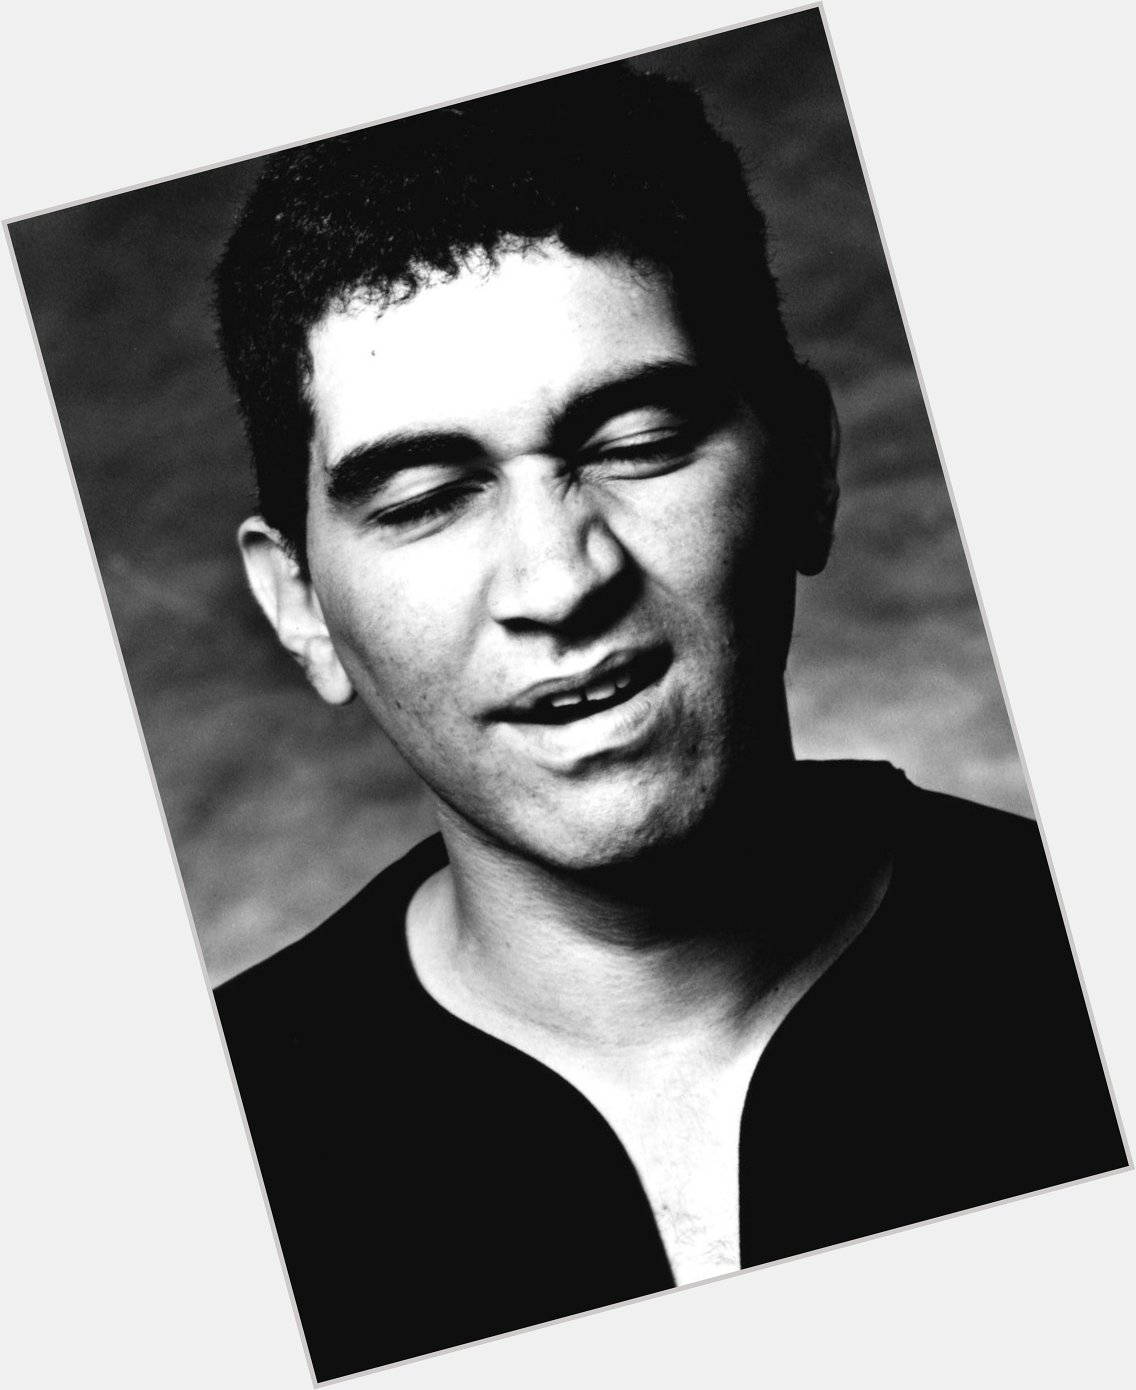 Happy birthday to Pat Smear! The coolest member of both Nirvana and Foo Fighters   